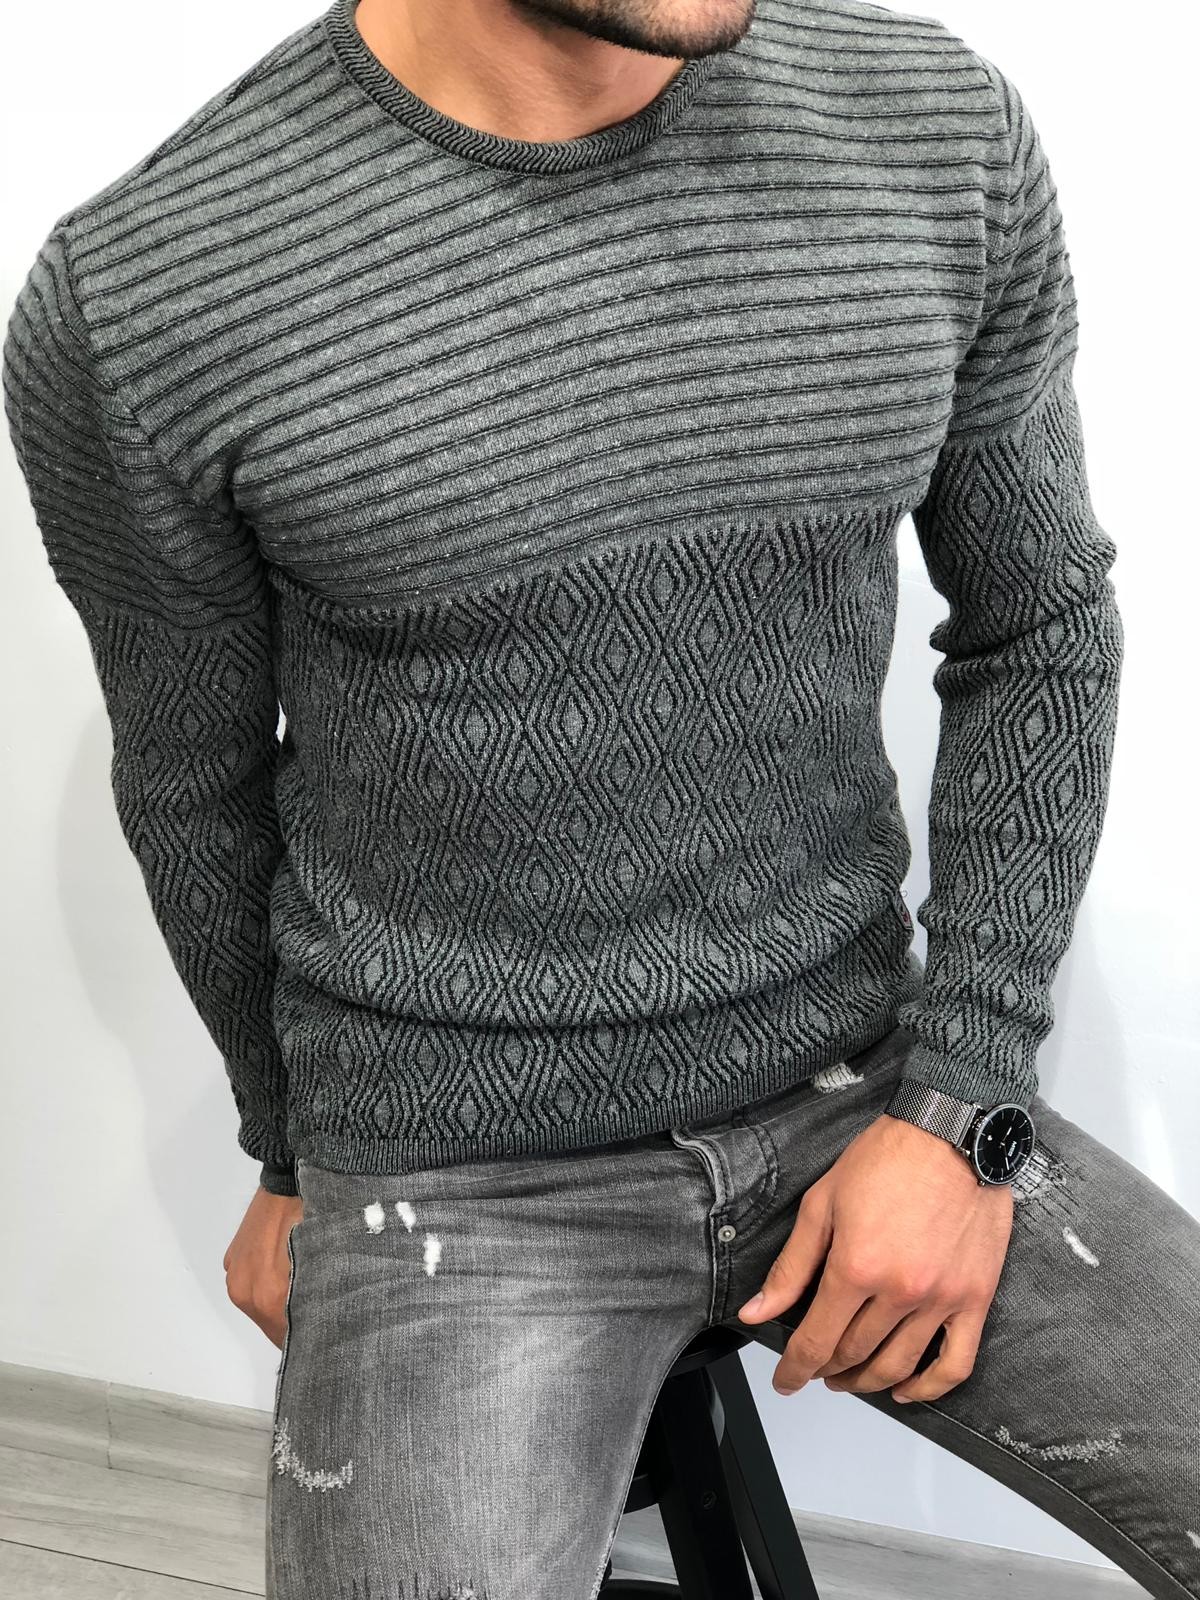 Buy Gray Slim Fit Patterned Sweater by Gentwith.com with Free Shipping